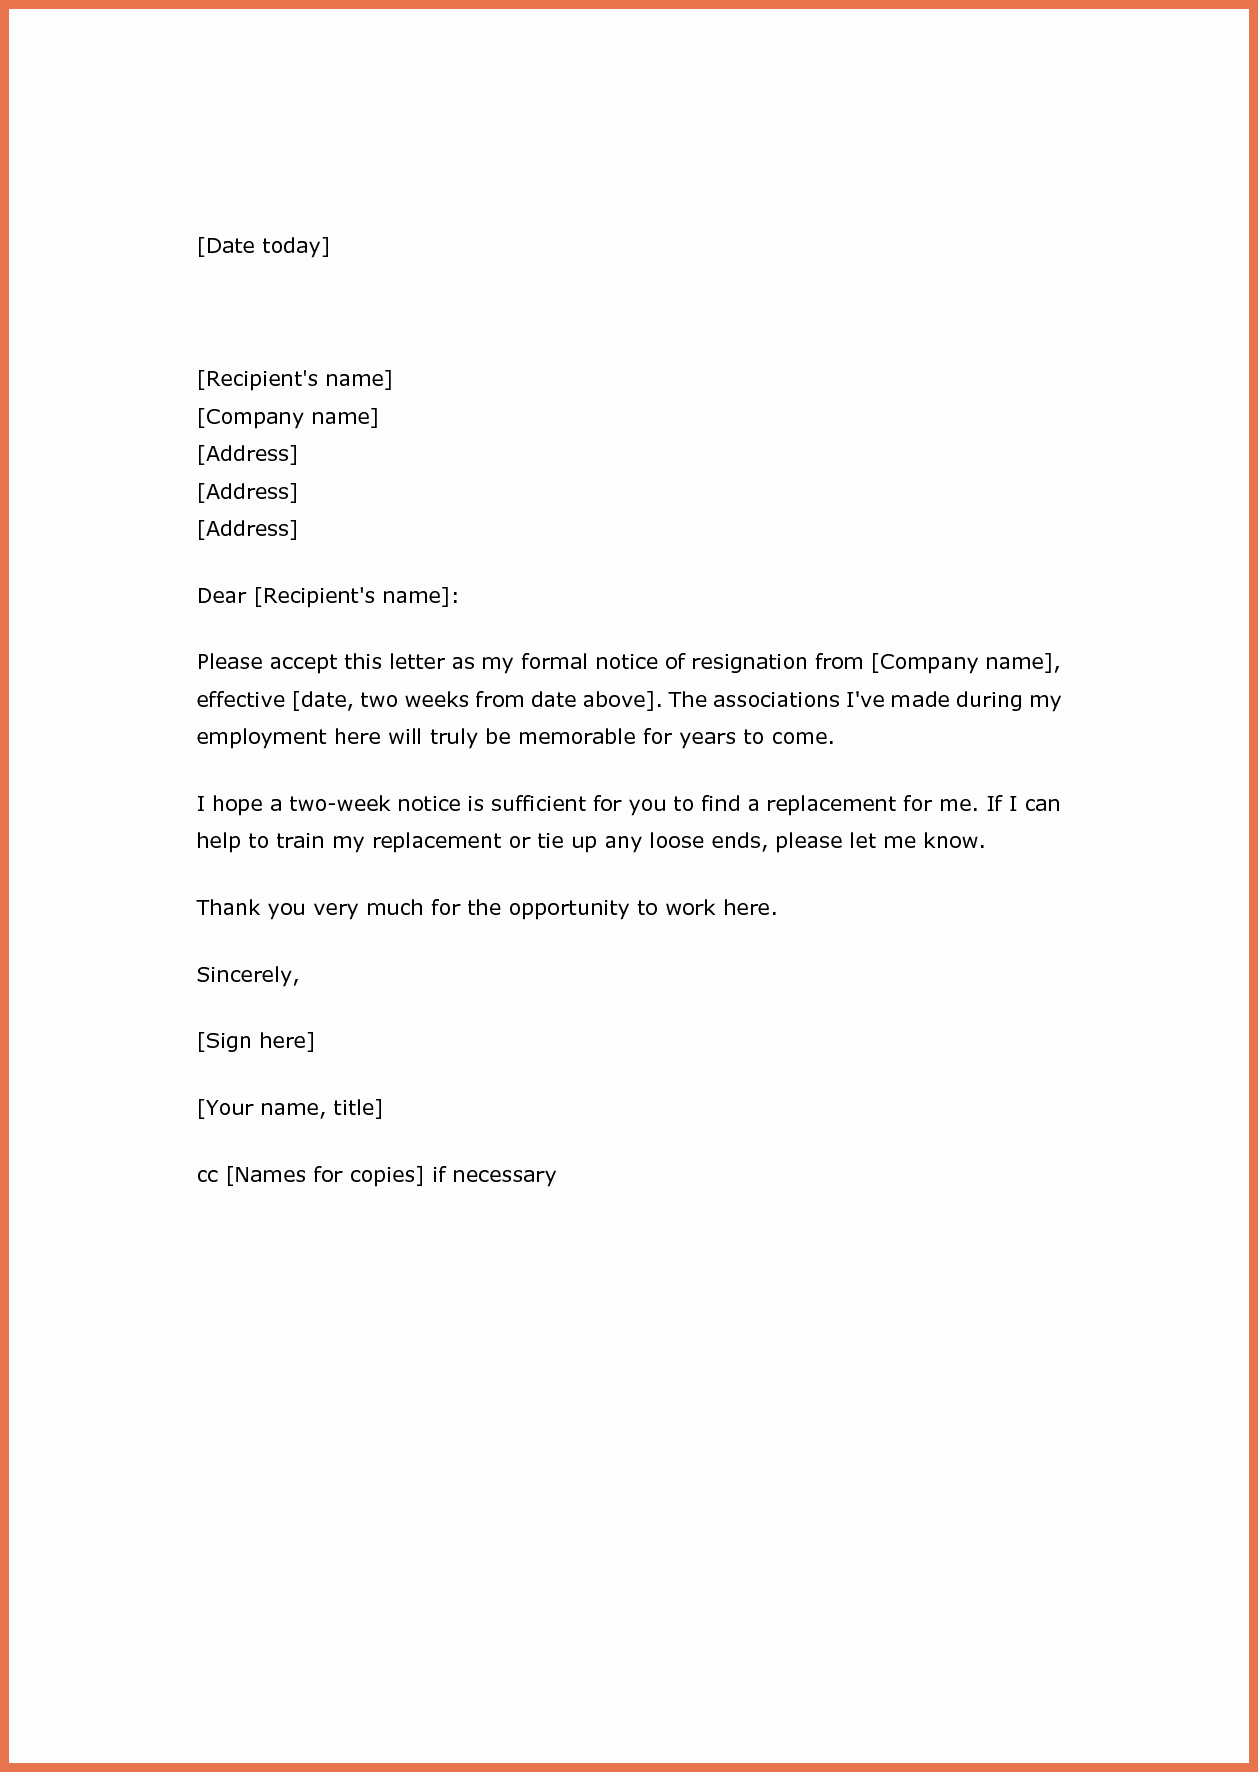 Written 2 Week Notice Unique Two Weeks’ Notice Resignation Letter Samples